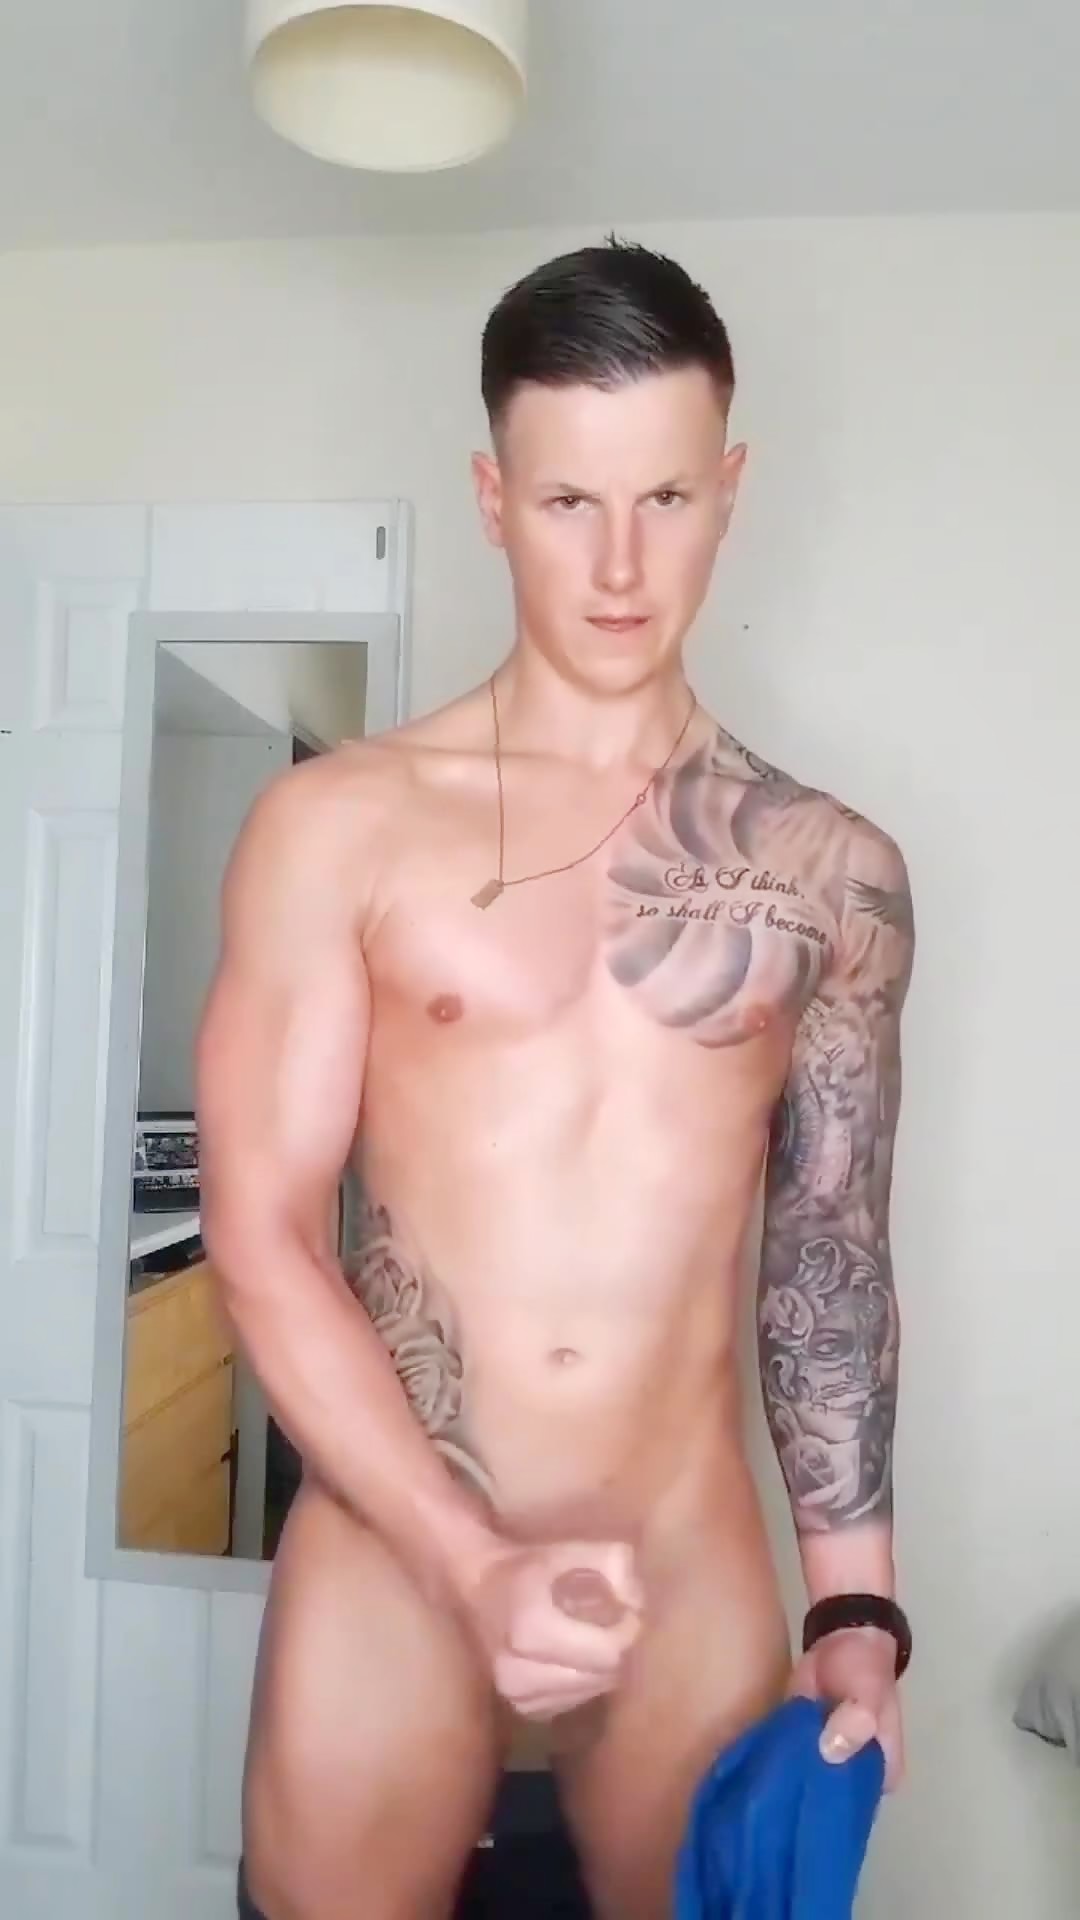 White guy with tattoos huge load